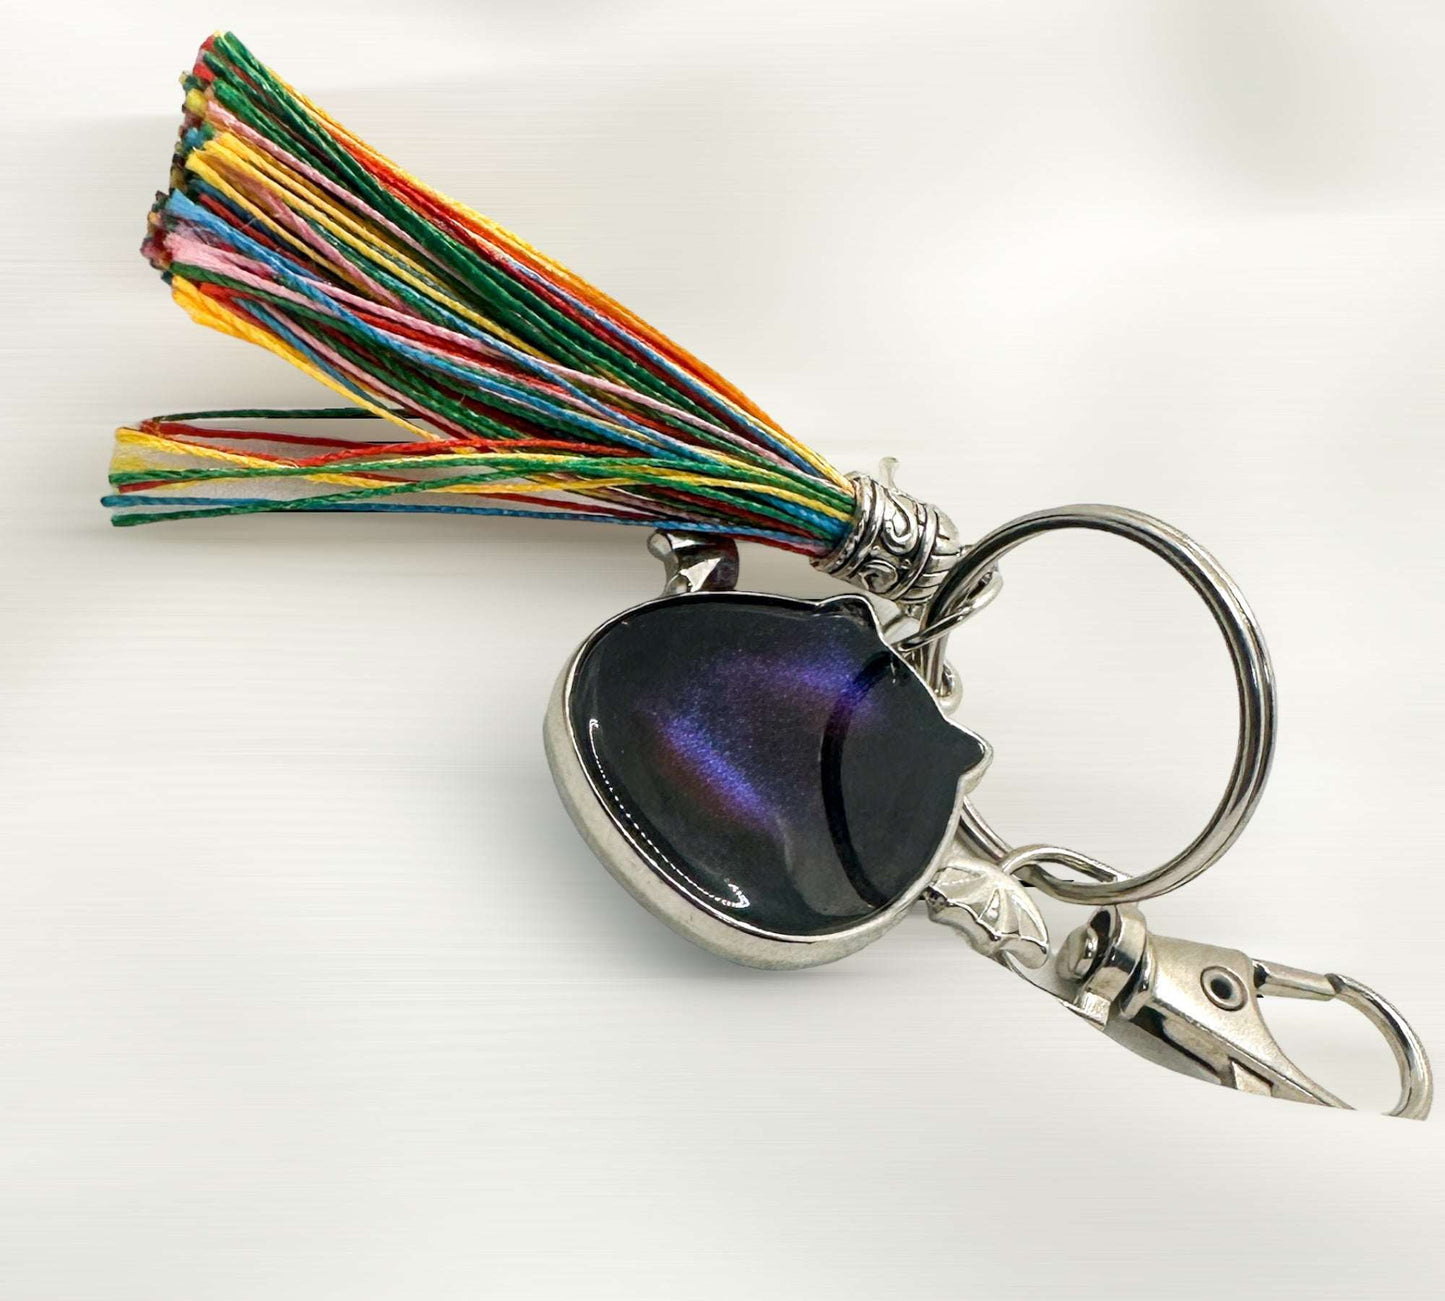 Haunted Halloween Flying Bat Keychains: Spooky Accessories for All